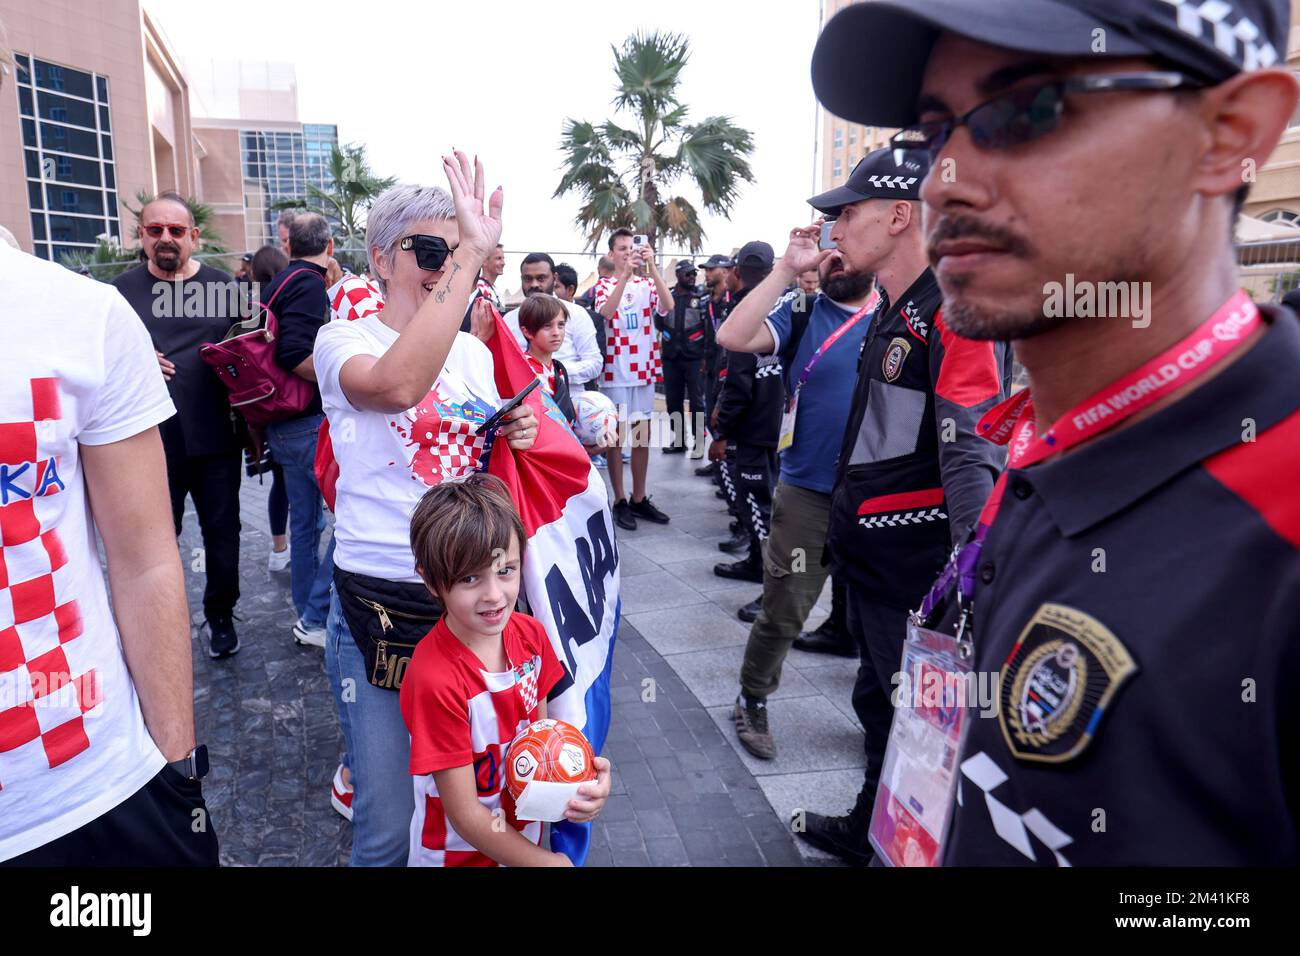 Croatia supporters are seen in front of Hilton Dona Hotel as Croatia national team leaves hotet after winning bronze medal at FIFA World Cup Qatar 2022 in Doha, Qatar on December 18, 2022. Photo: Igor Kralj/PIXSELL Stock Photo